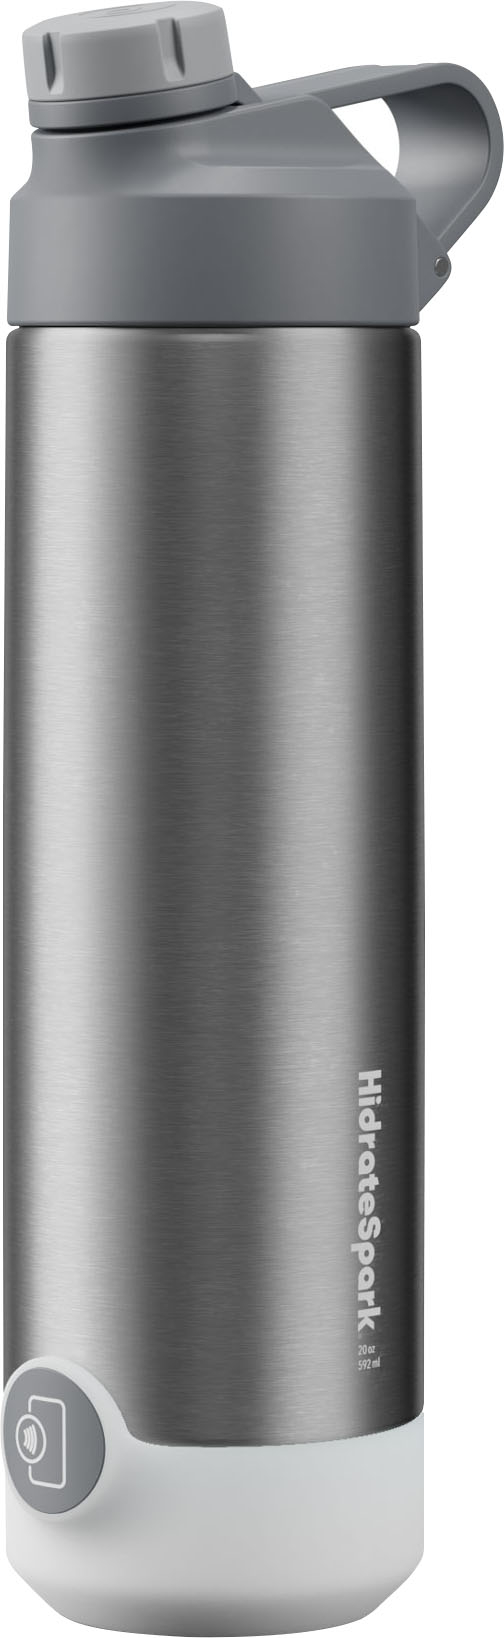 HydroJug Stainless Steel HydroShaker 24 oz. - Personalization Available